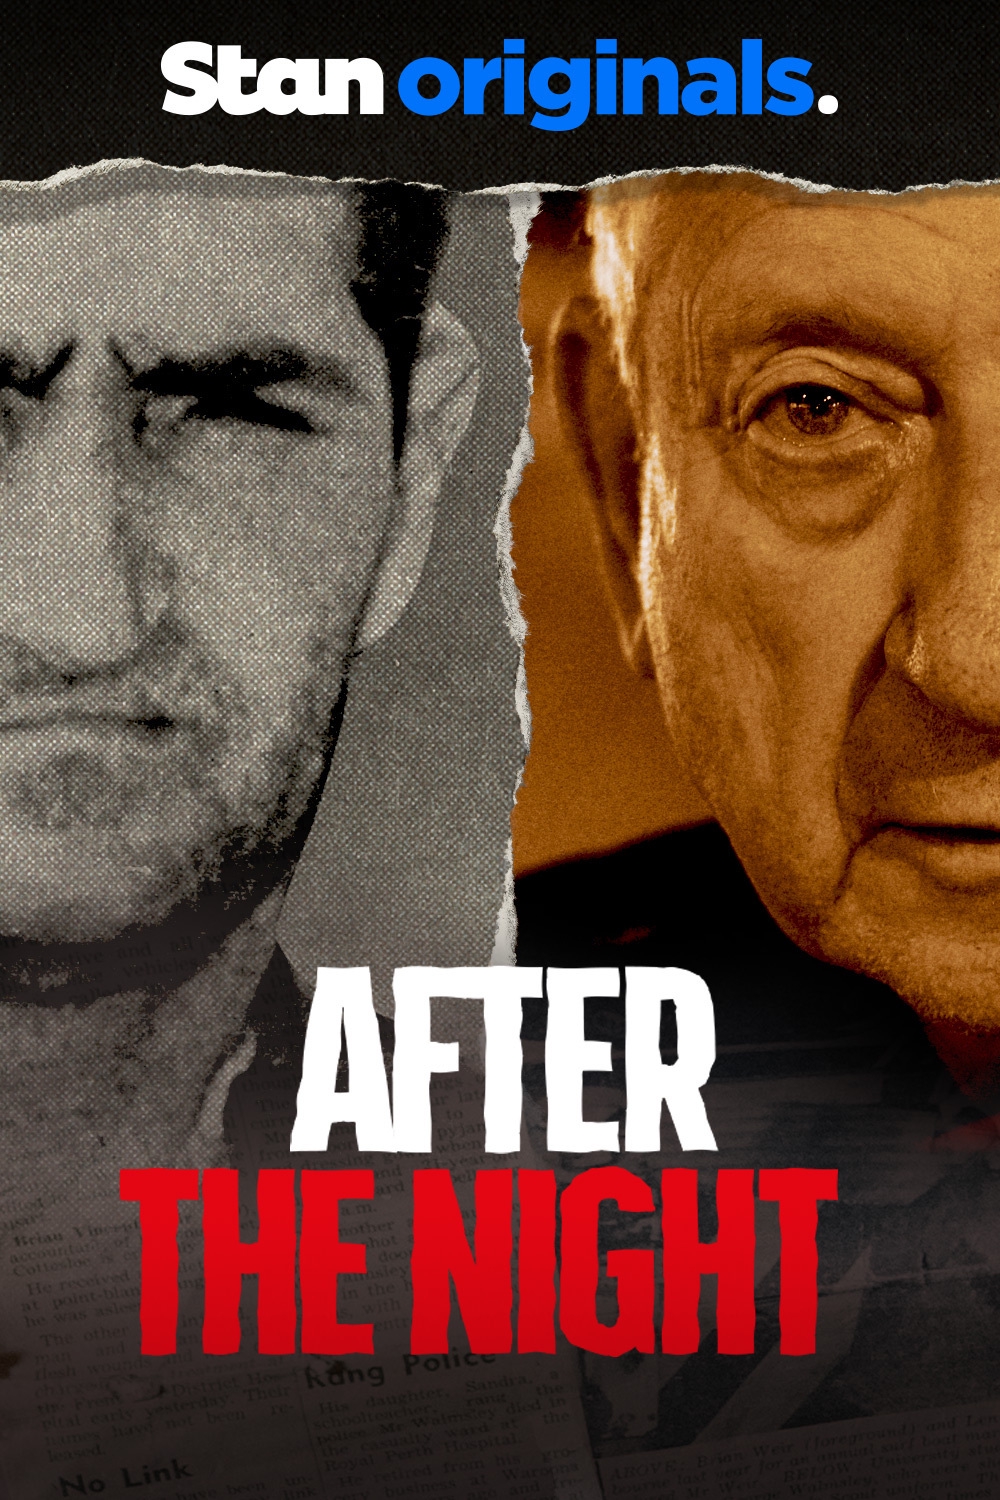 Watch After the Night | Now Streaming | Stan Originals.